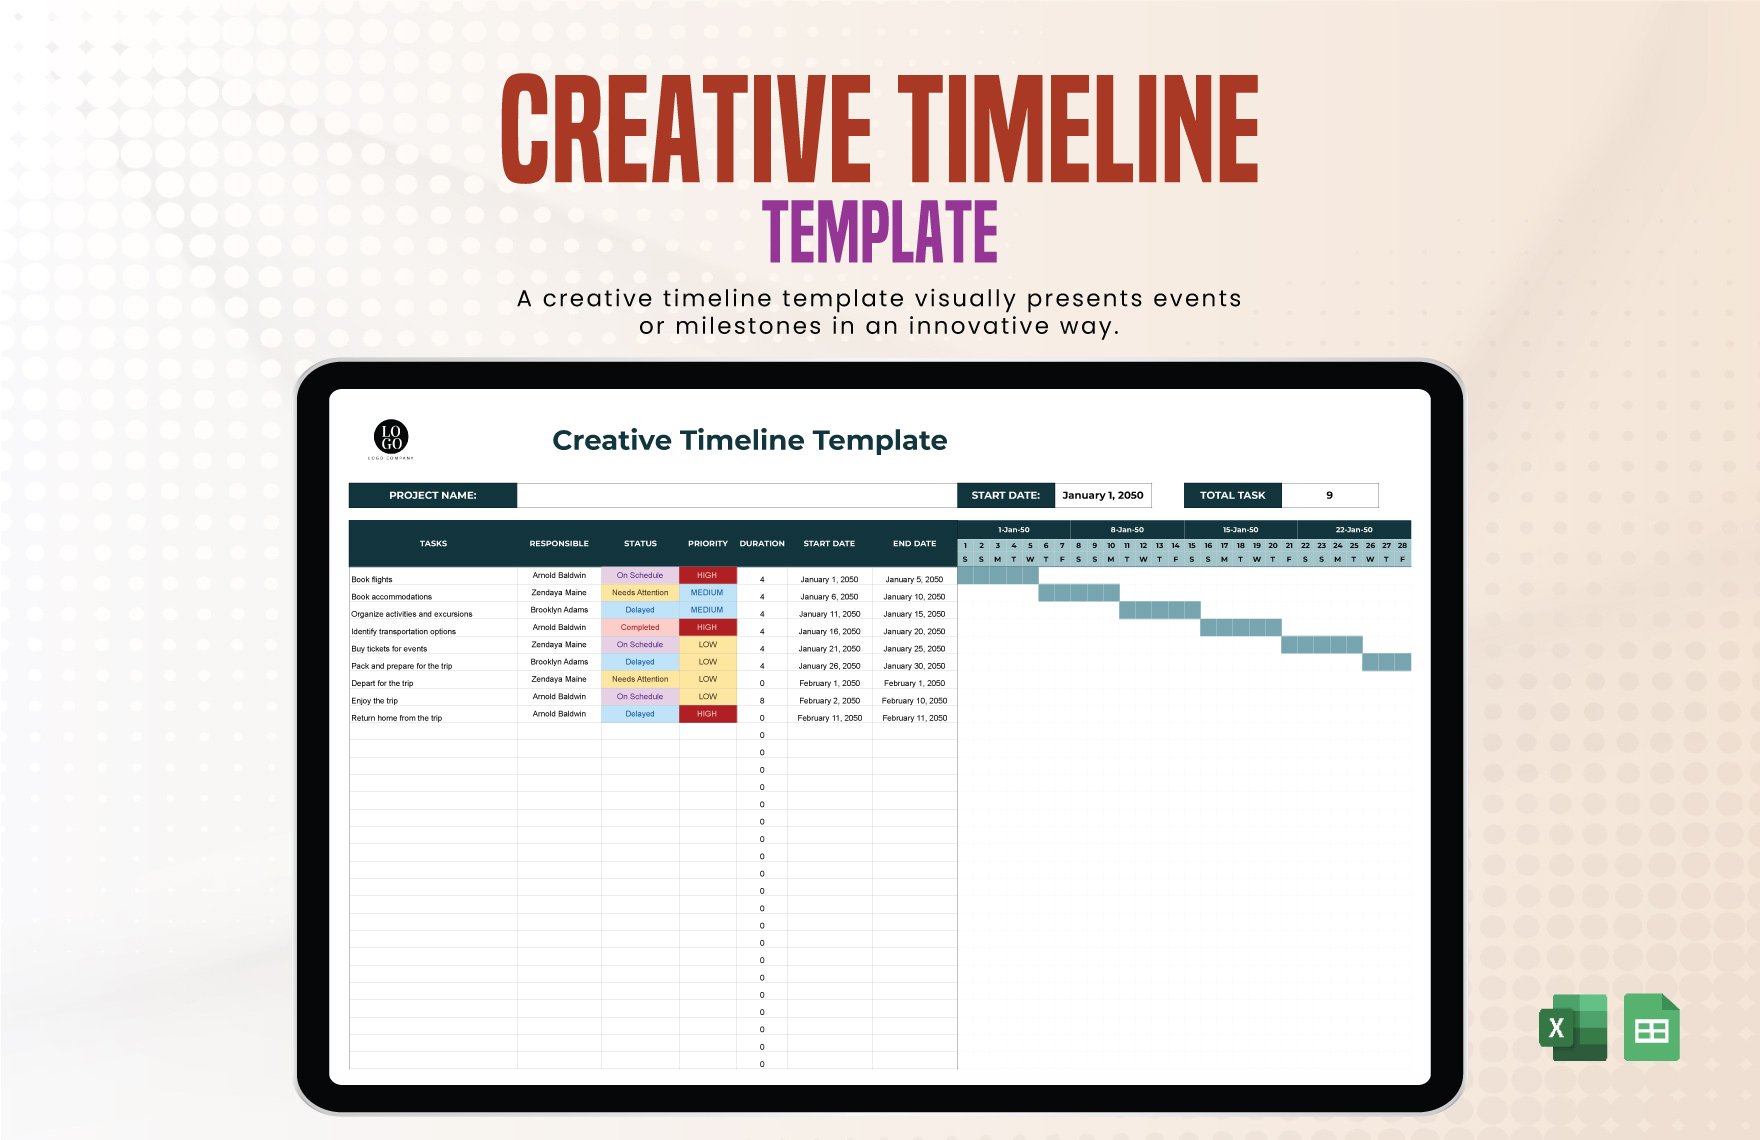 Creative Timeline Template in Excel, Google Sheets